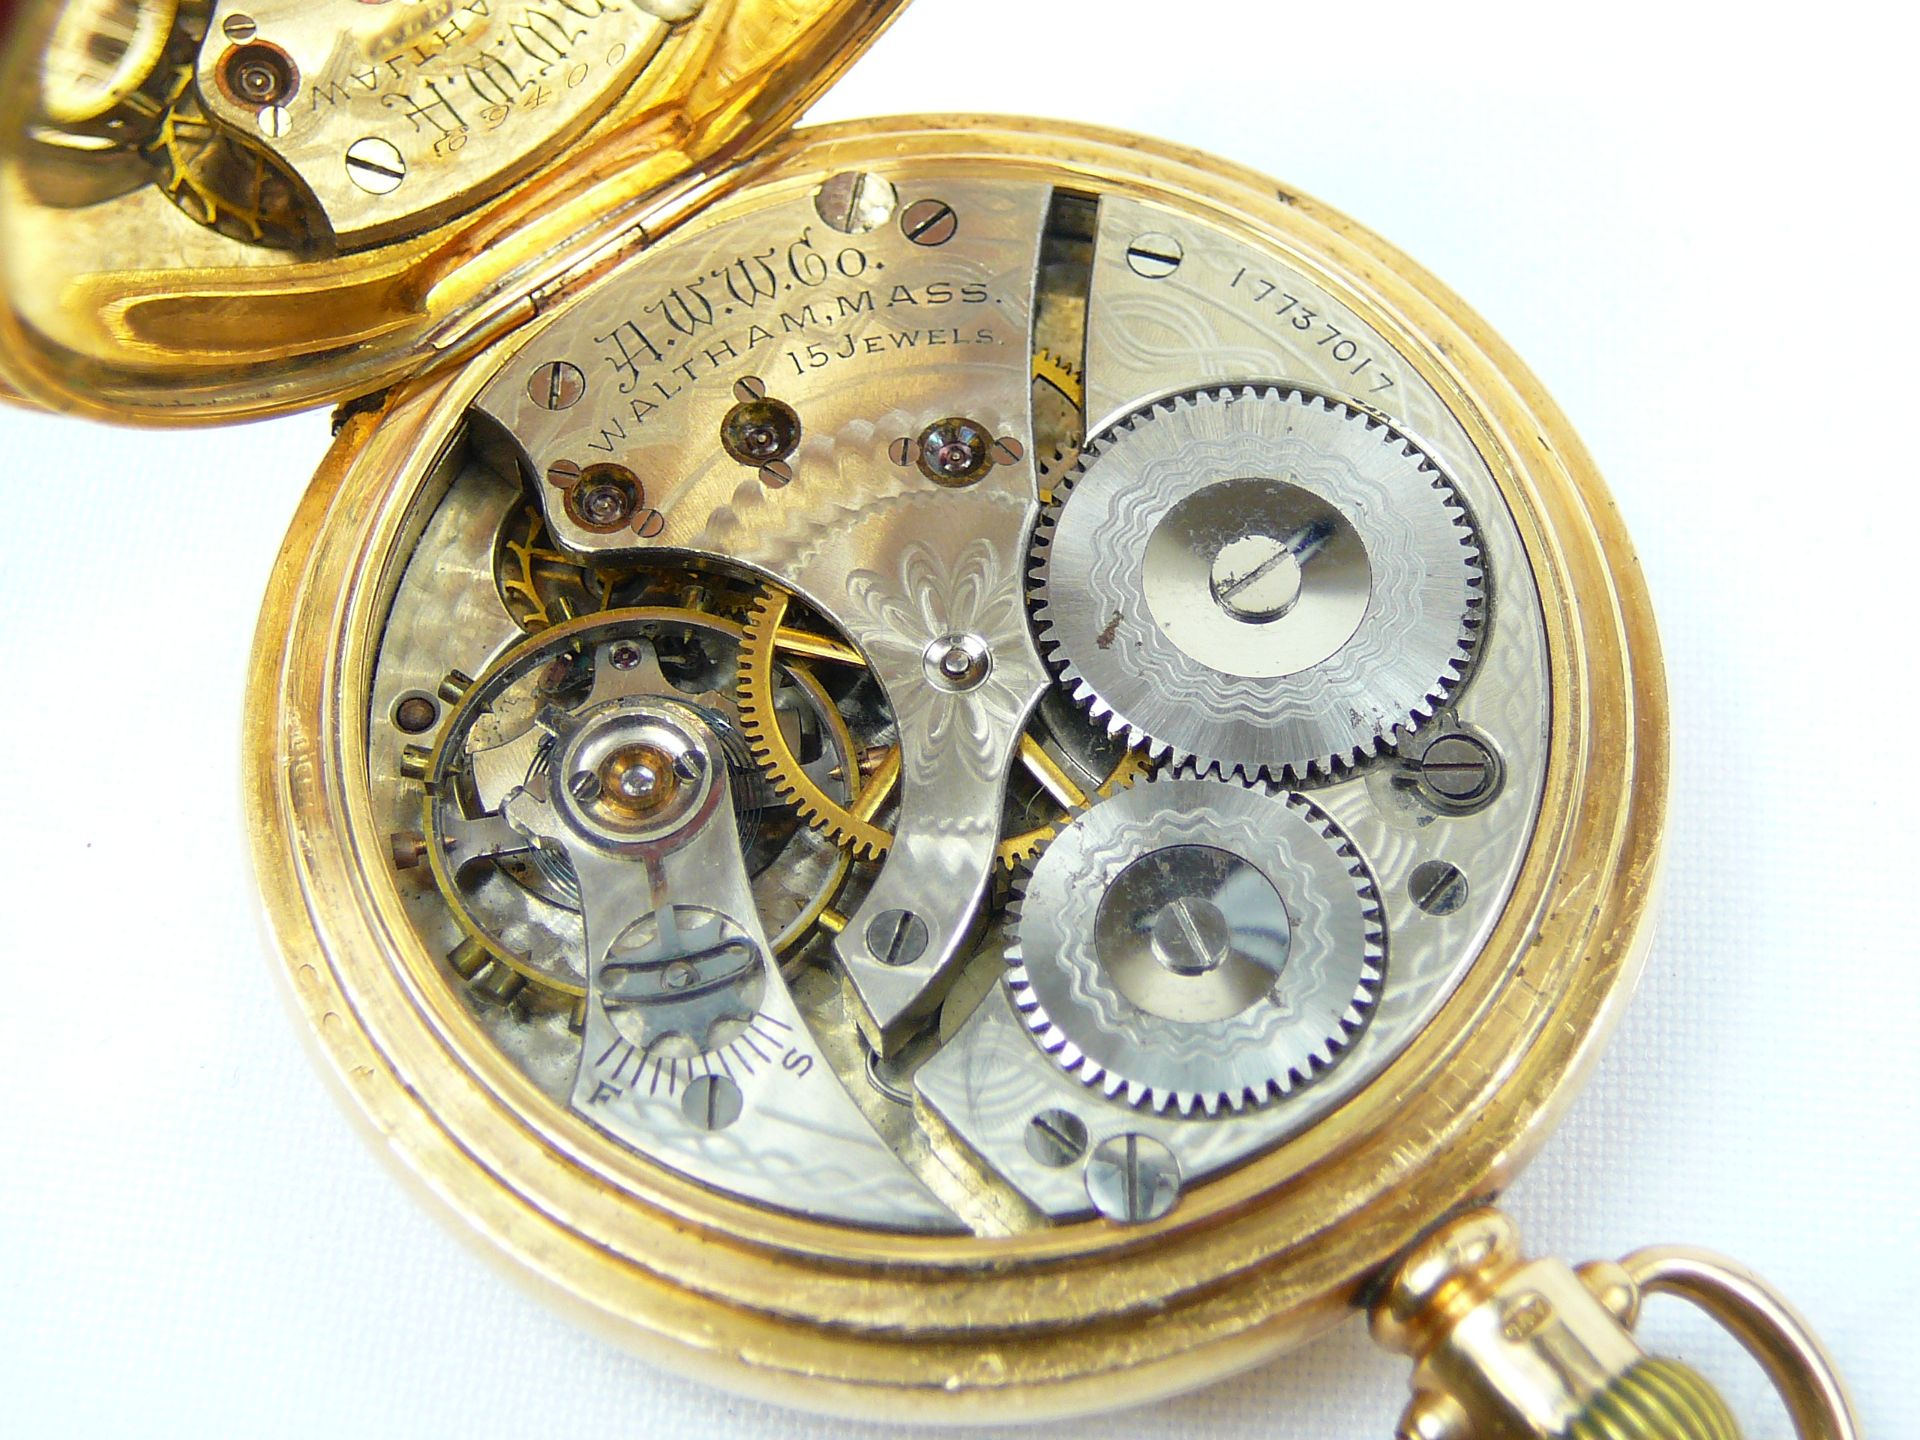 Gents gold pocket watch - Image 7 of 7